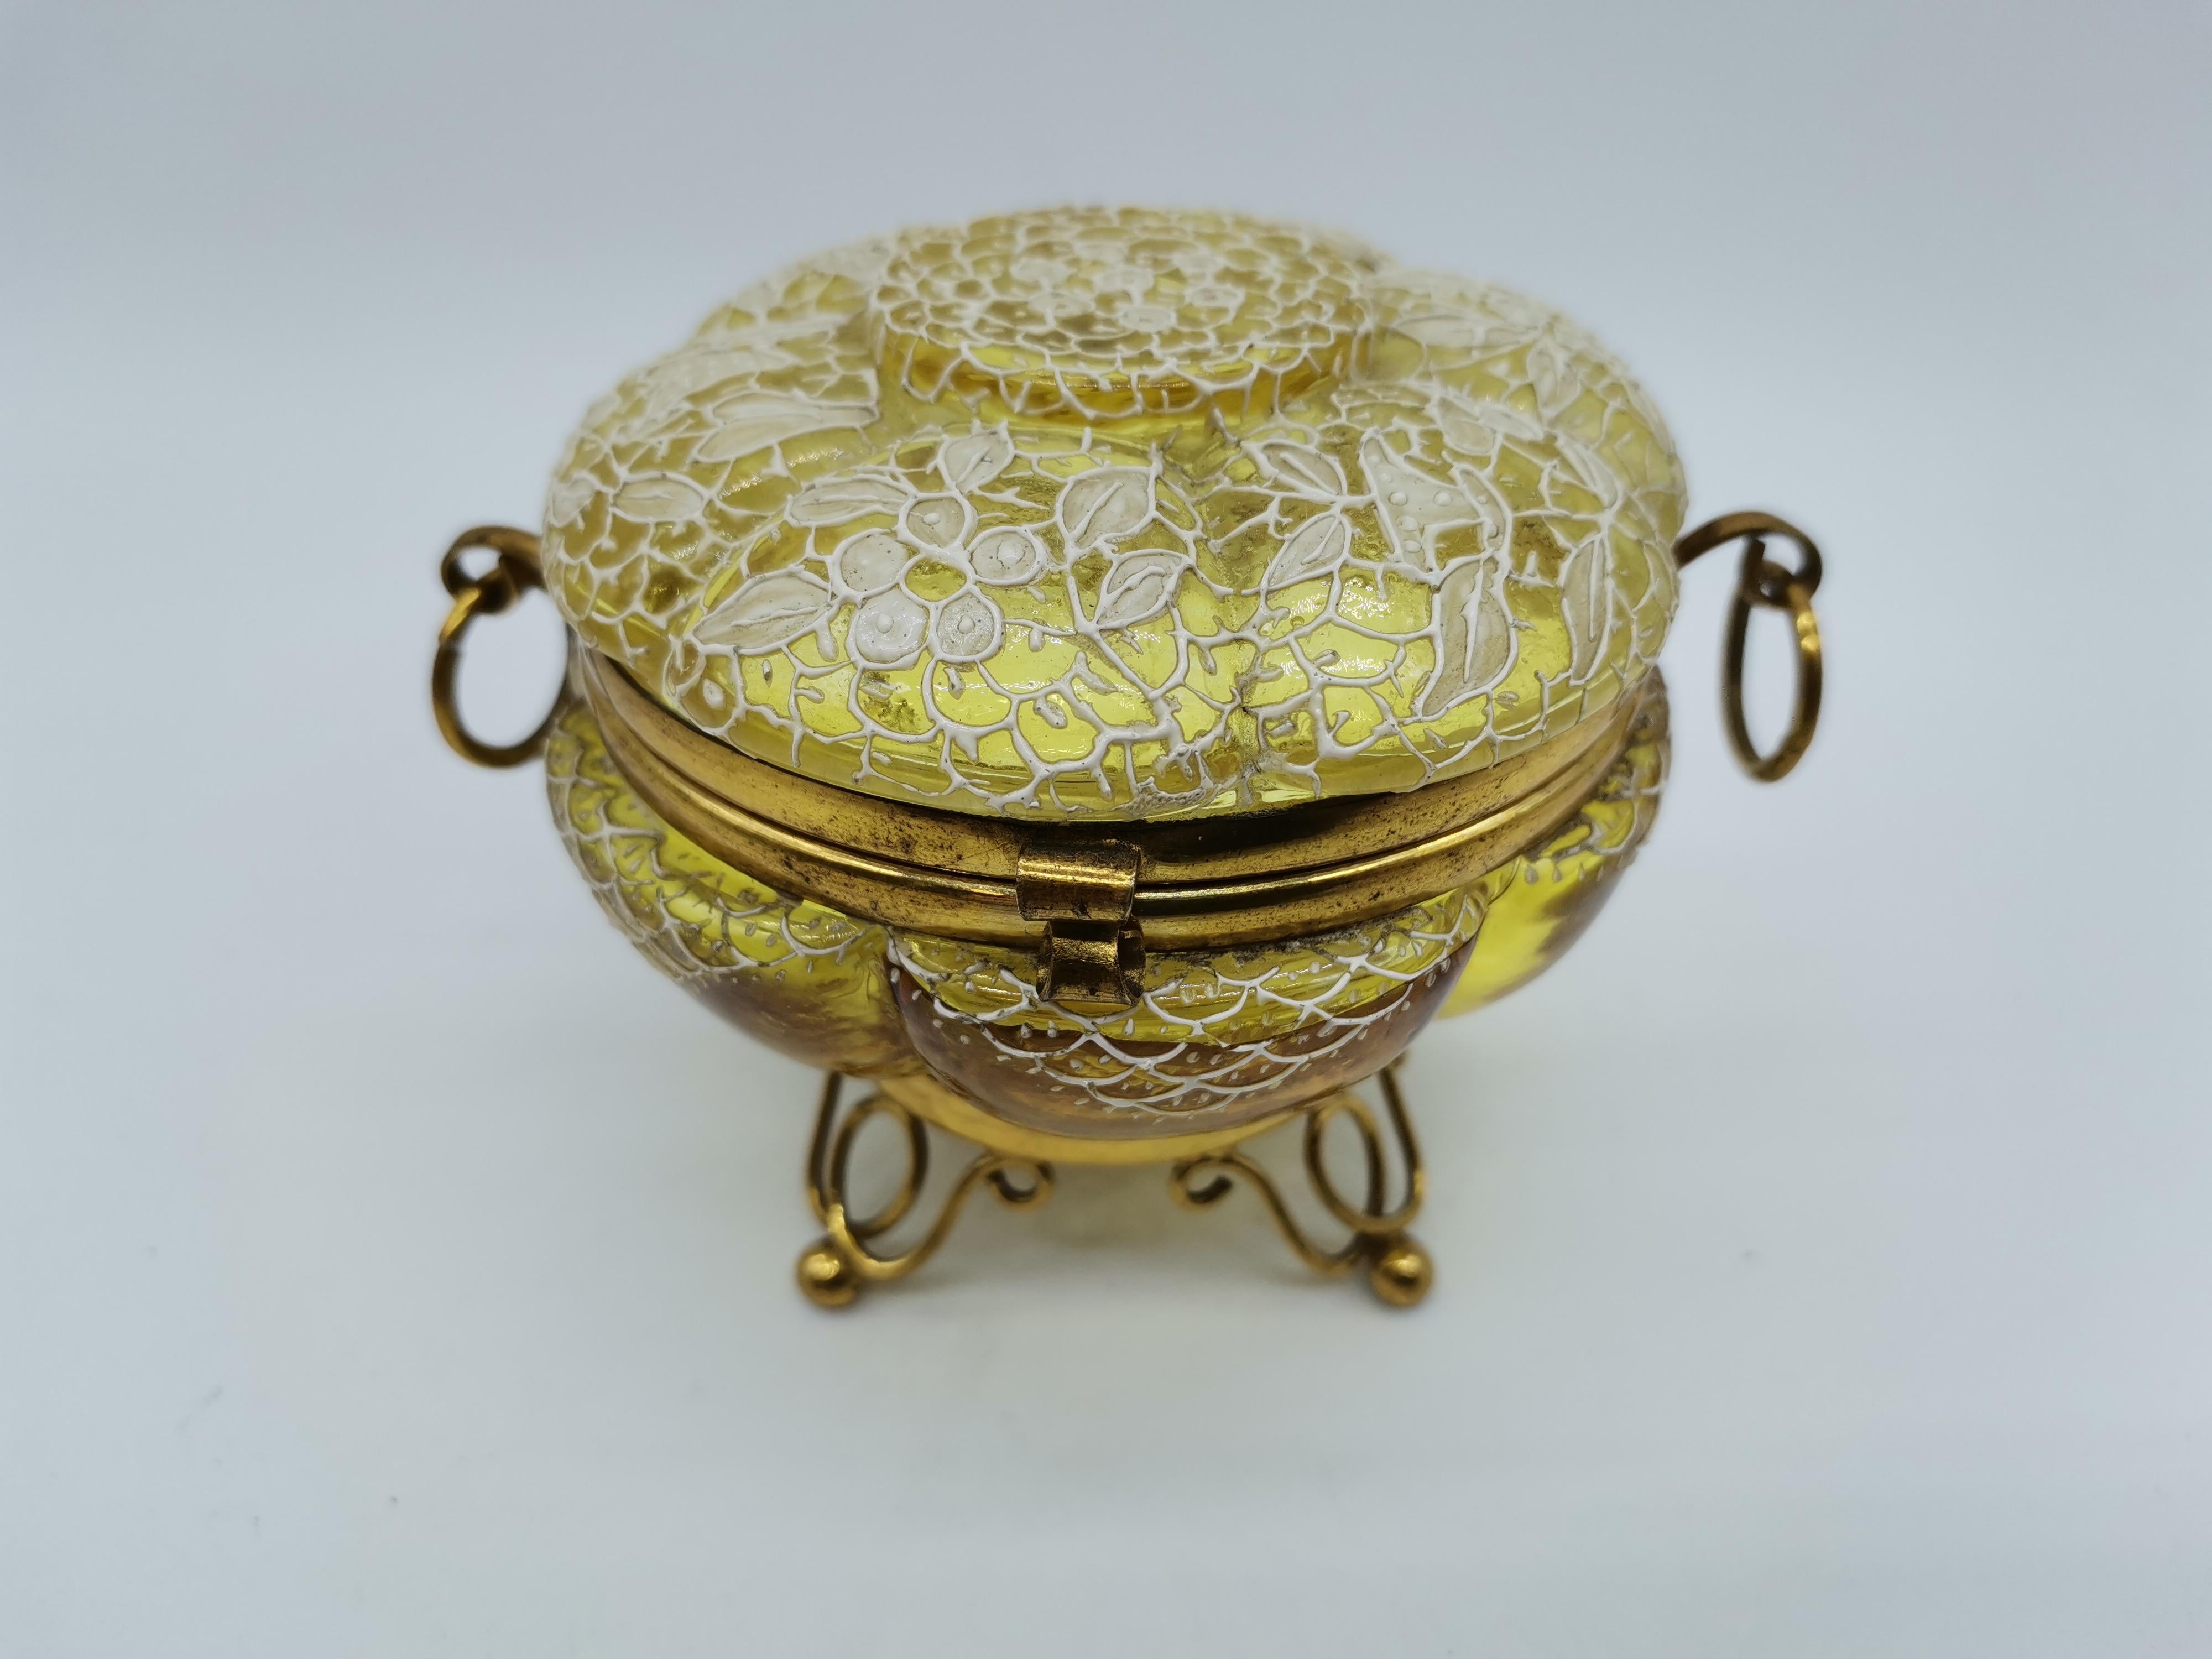 A small casket for jewelery made of glass and brass in Venice.